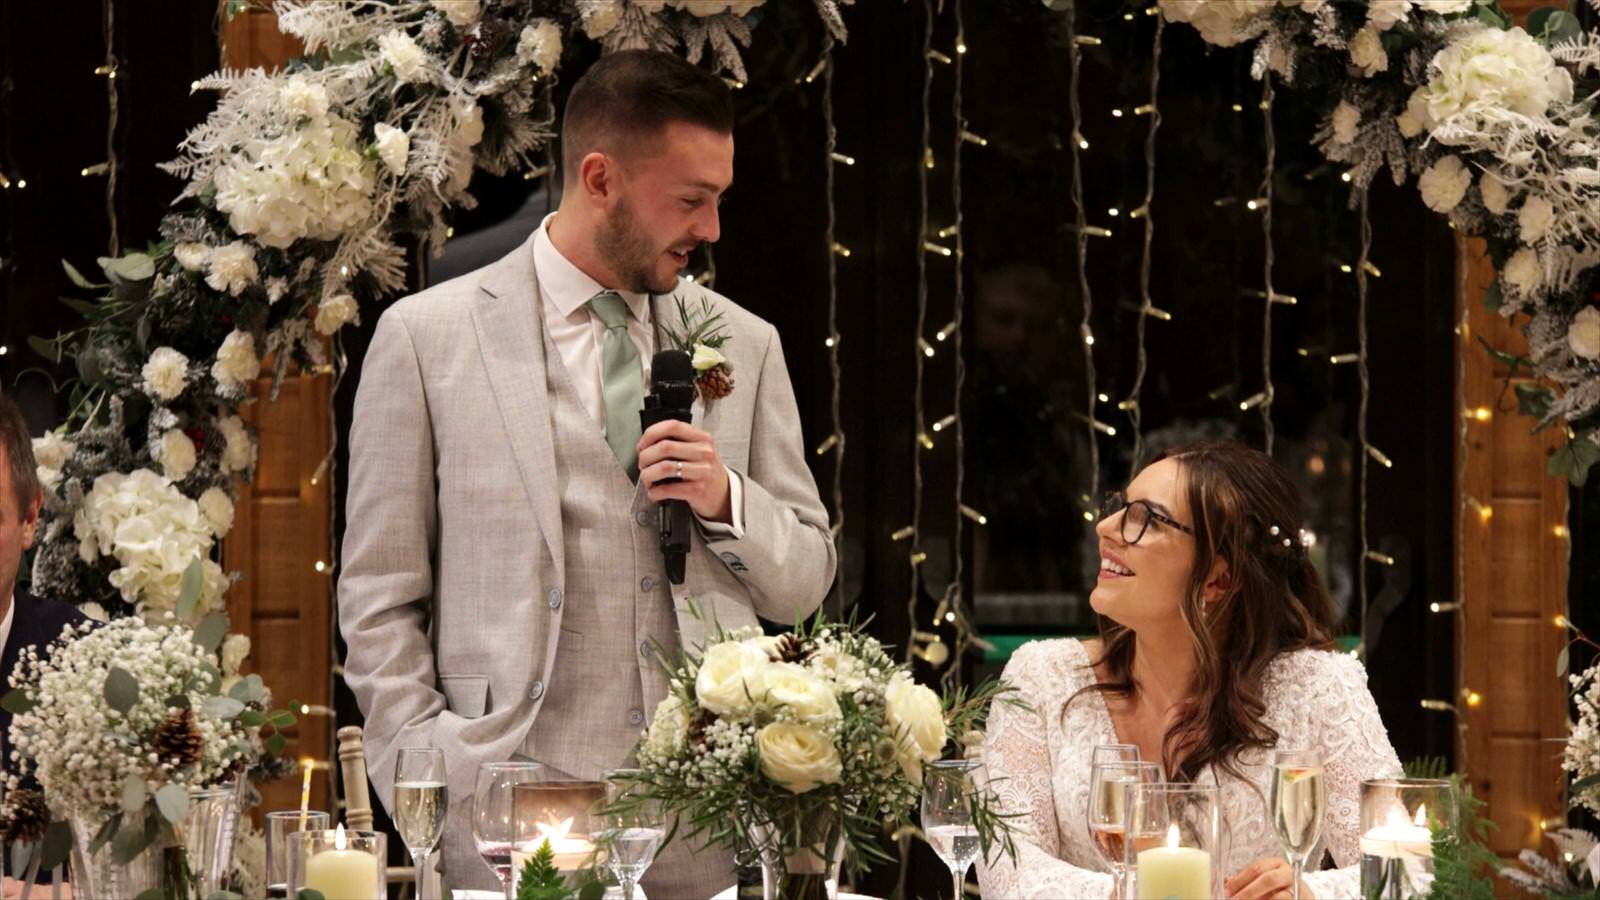 couple smile at each other during Grooms speech